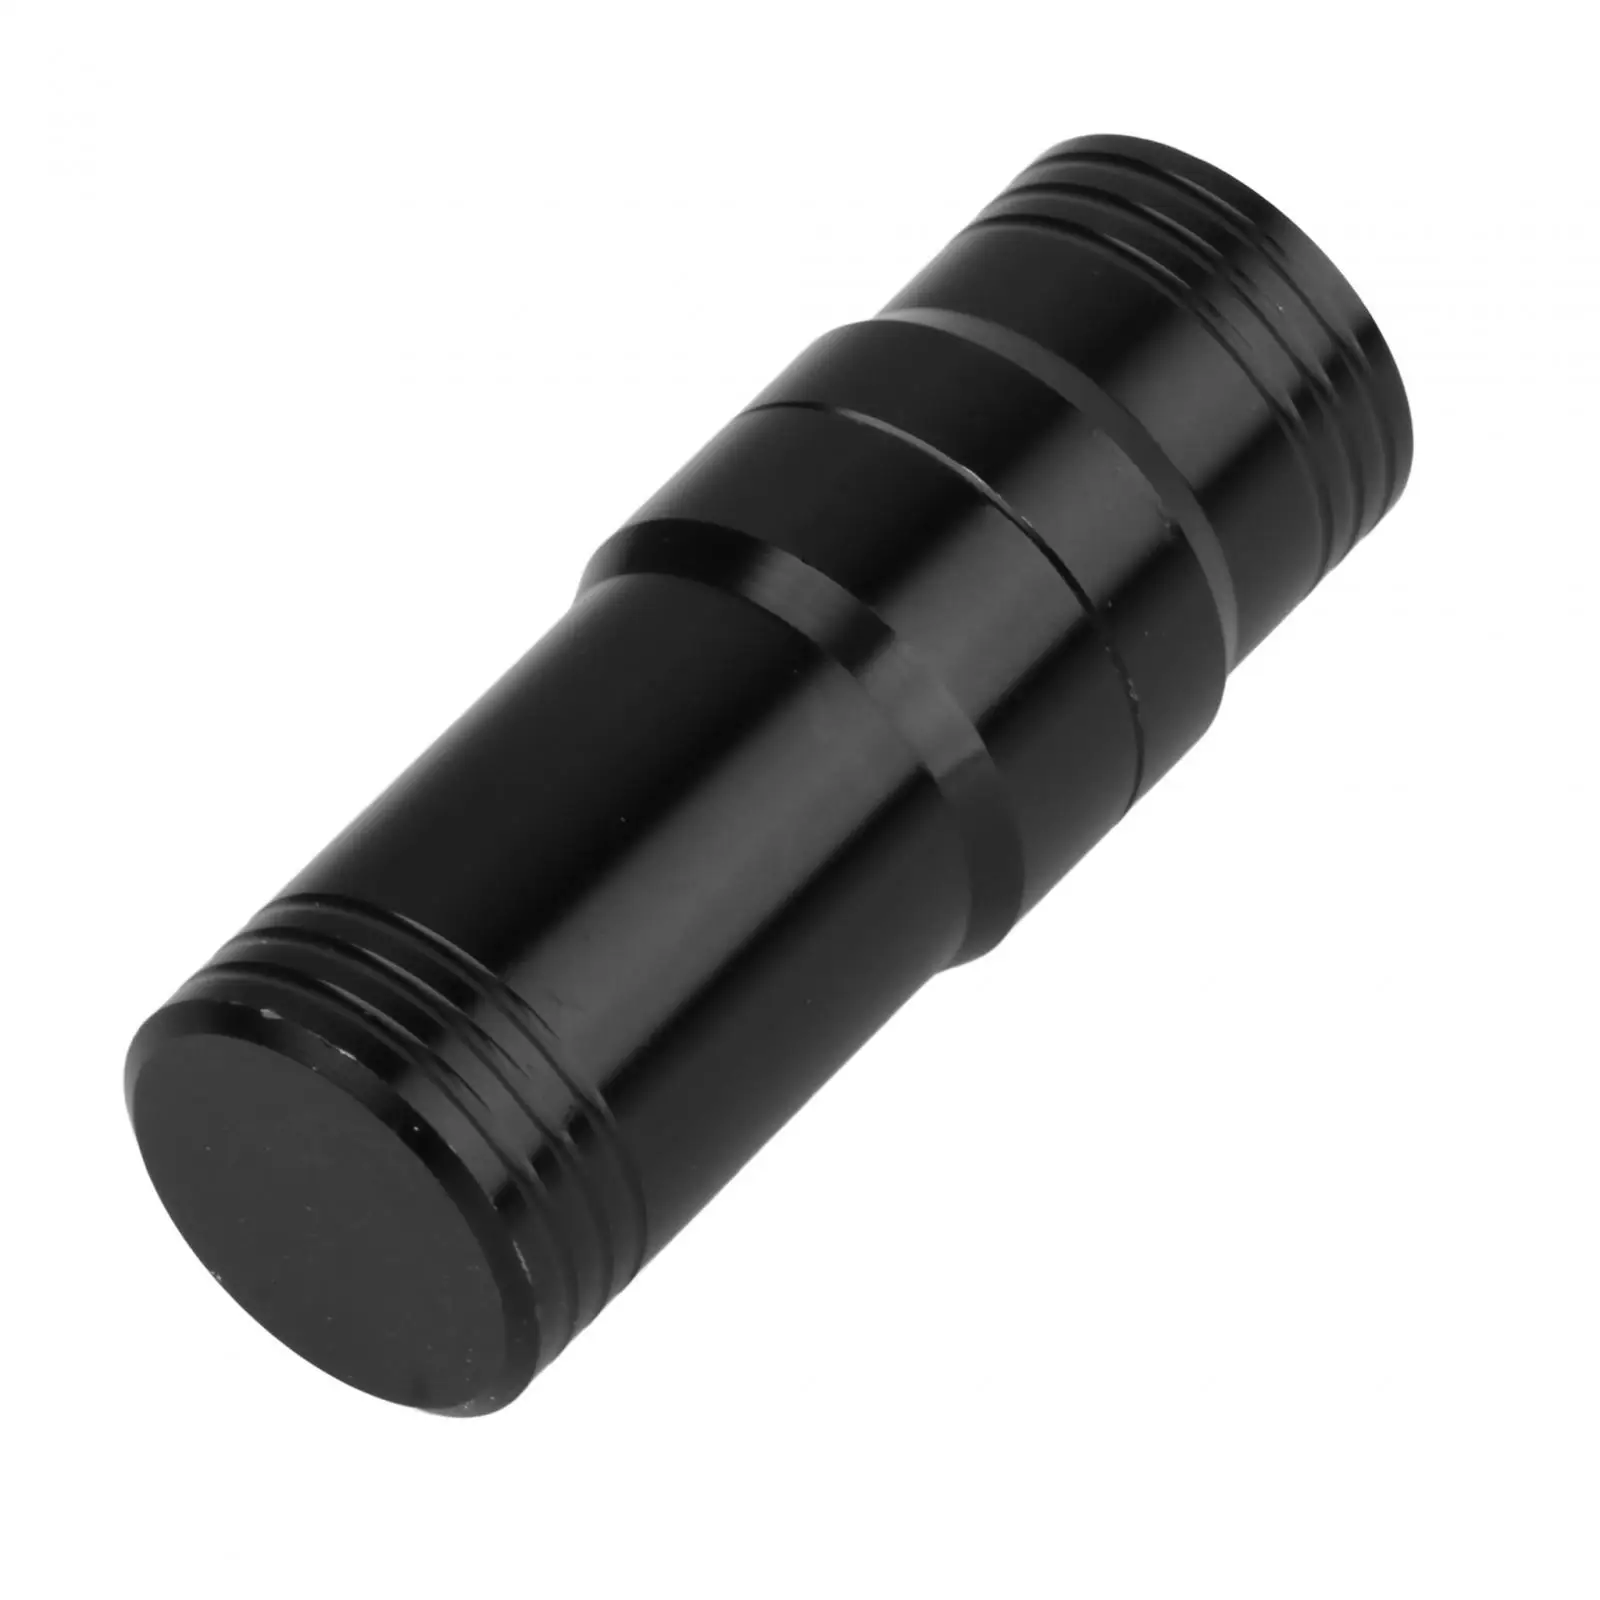 Joint Protector for Pool Cue Billiards Stick Protects Your Cue Stick